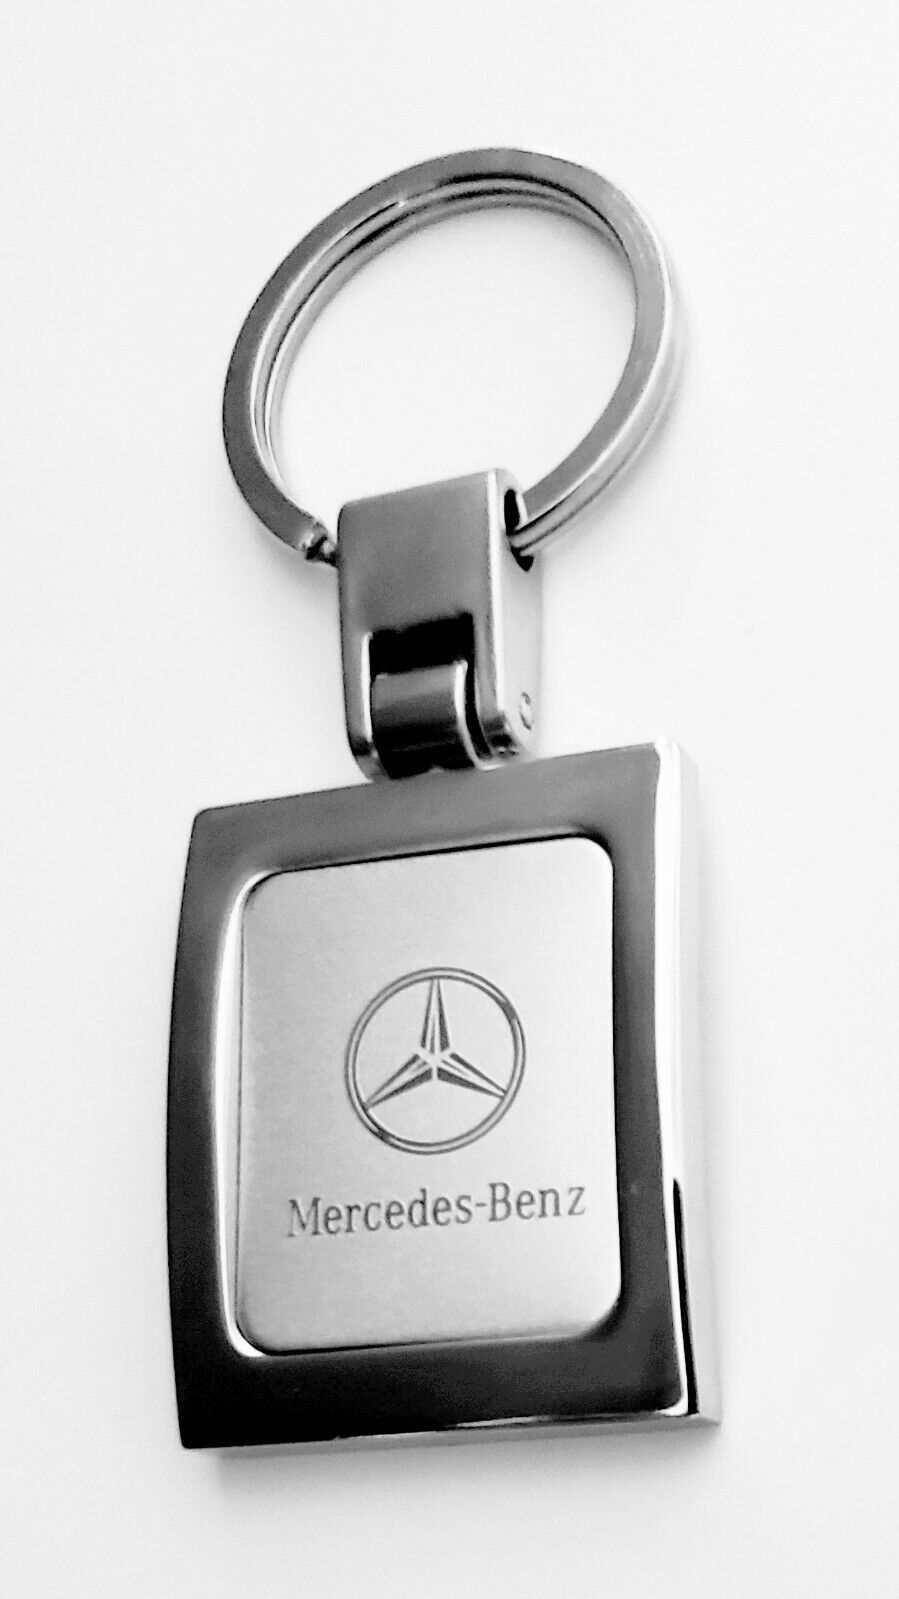 Mercedes-Benz of Chicago Dealer Authentic Keychain Polished Stainless Steel